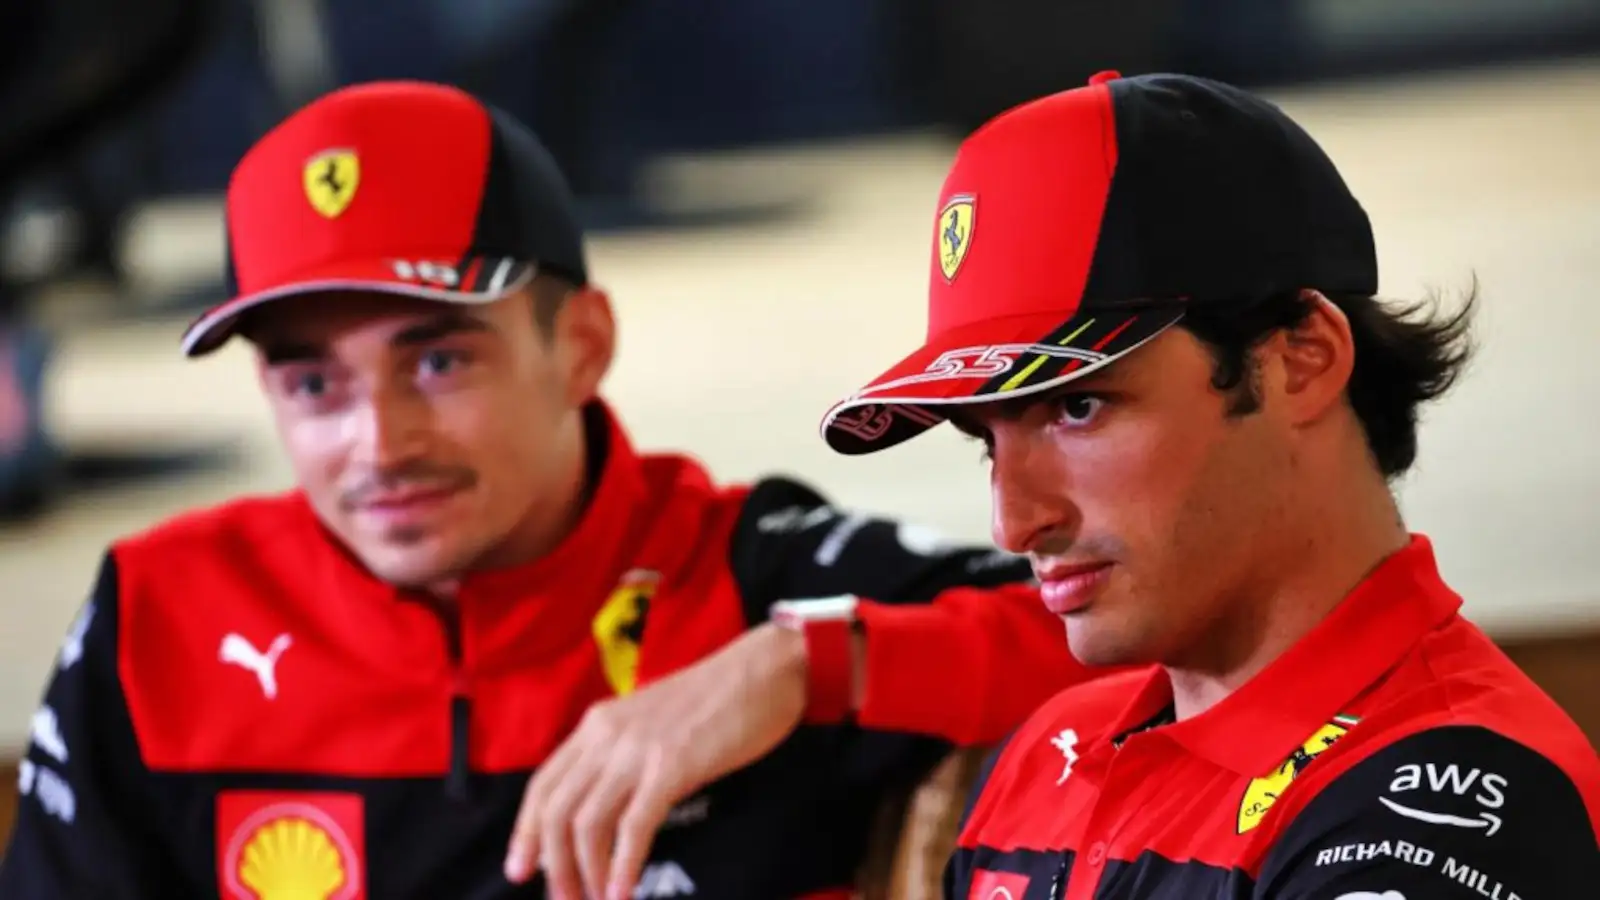 Carlos Sainz looking serious during an interview with Charles Leclerc. Jeddah March 2022